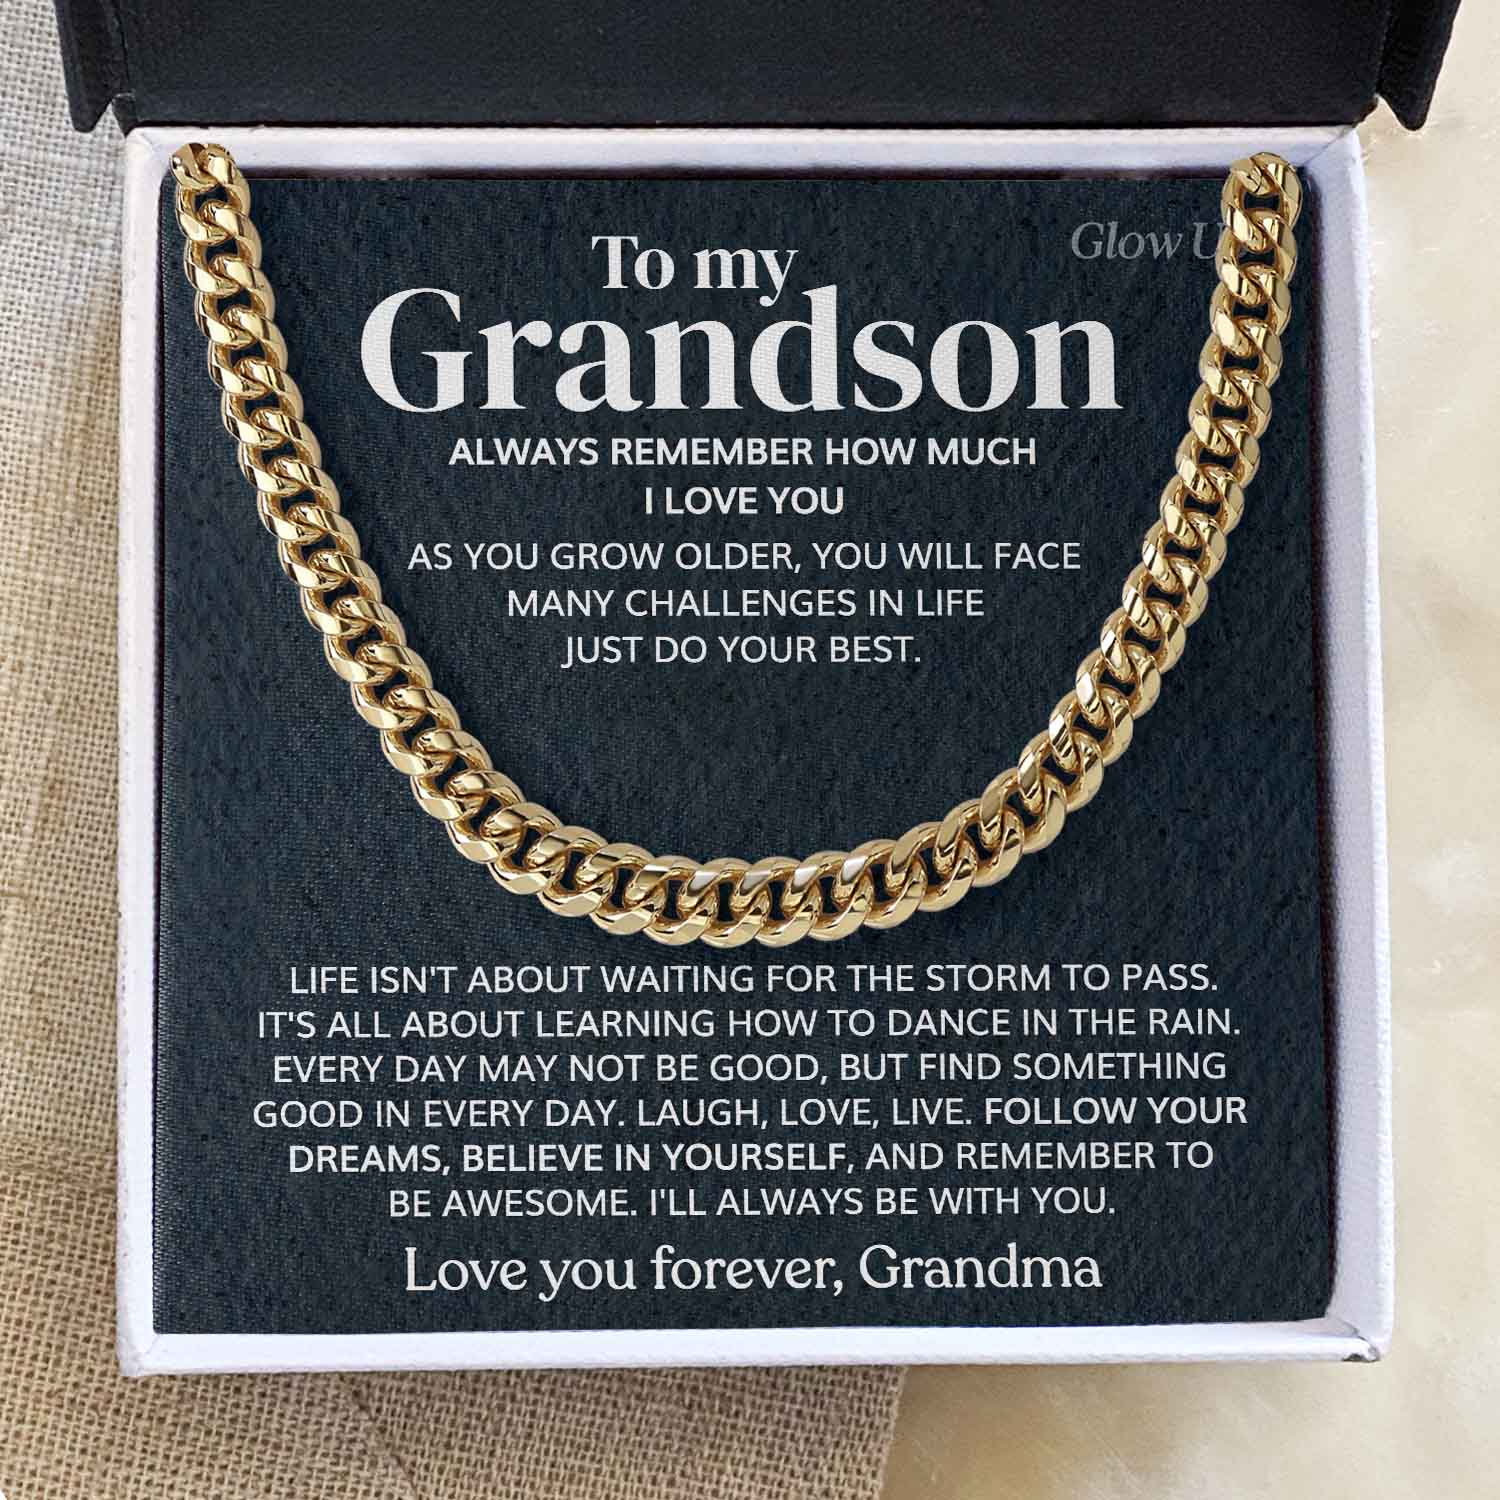 ShineOn Fulfillment Jewelry 14K Yellow Gold Finish / Two-Toned Box To my Grandson - Always remember - Cuban Link Chain